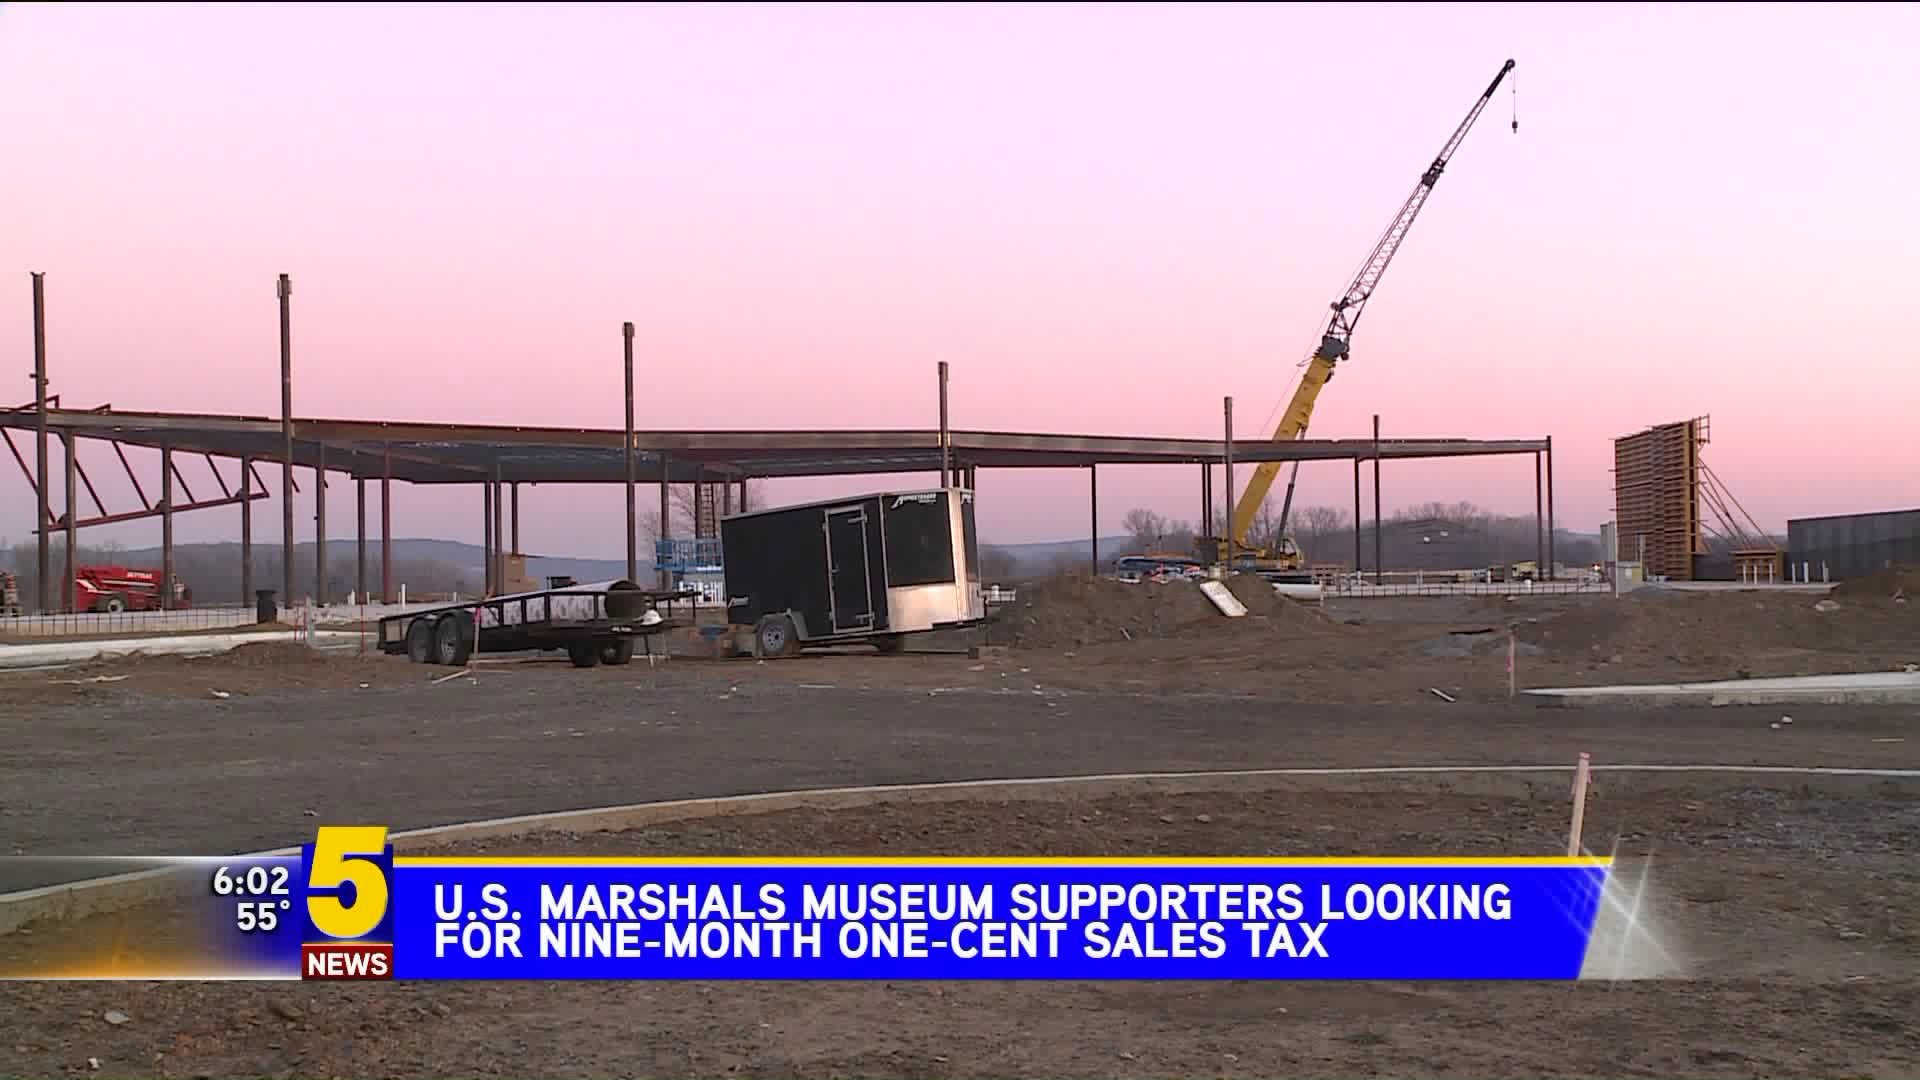 U.S. Marshals Museum Supporters Looking For Temporary Salex Tax Increase